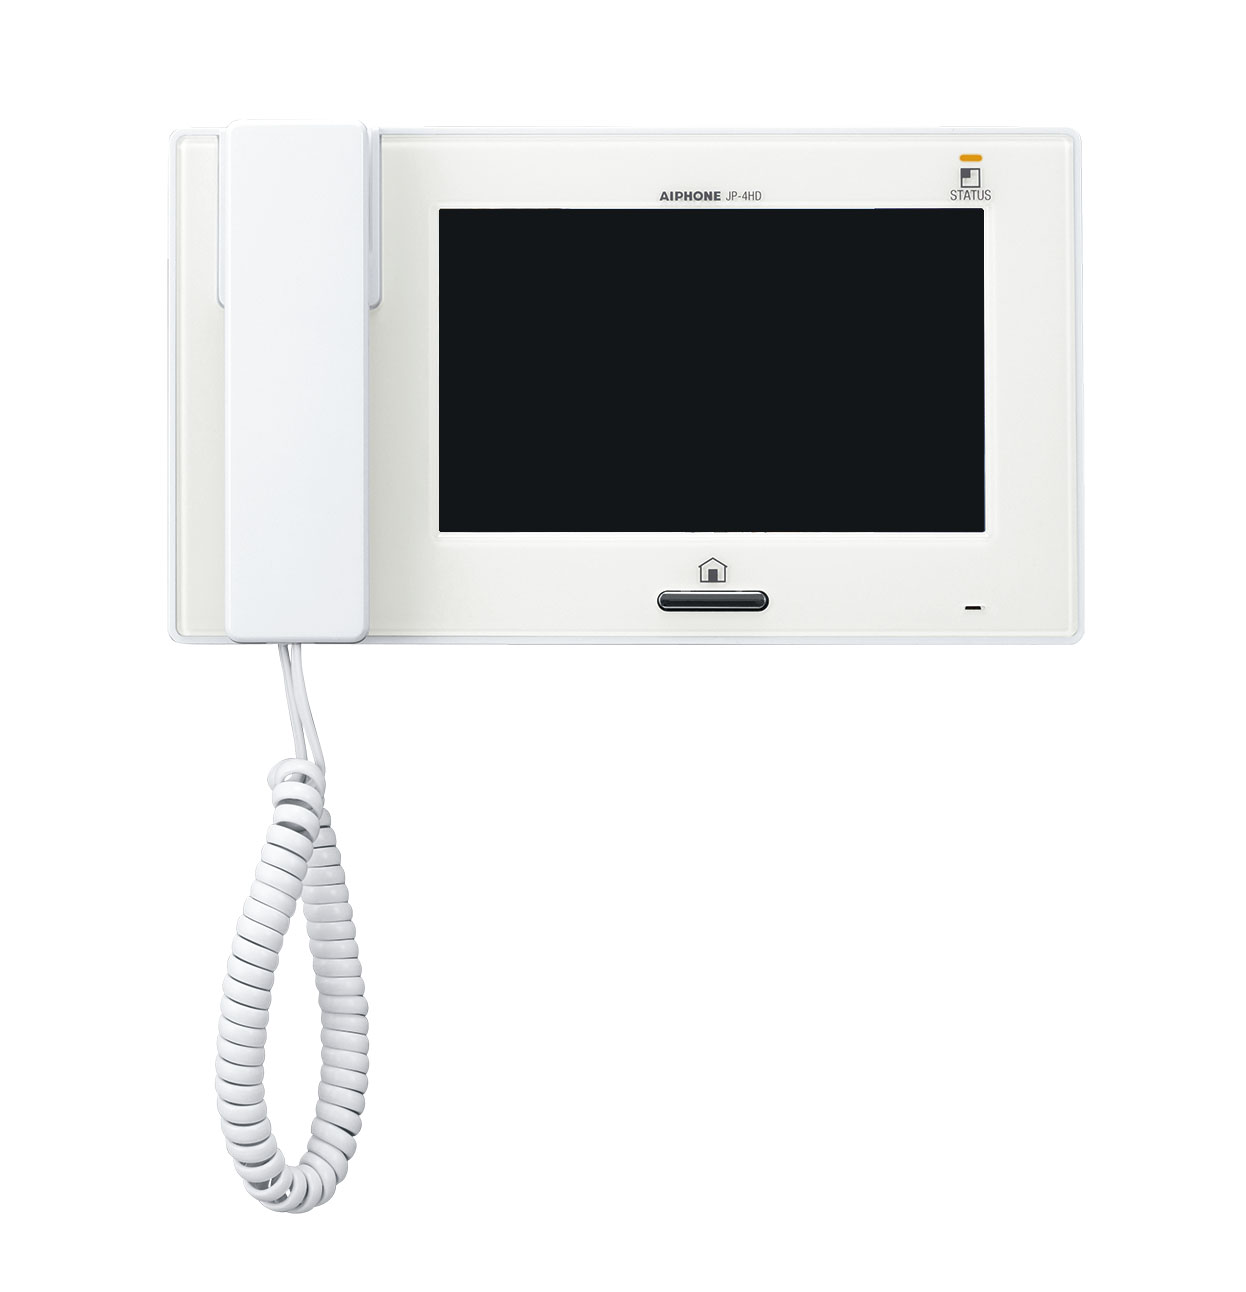 AIPHONE JP SERIES MULTI WIRE INTERCOM SUB MONITOR WHITE RESIDENTIAL/COMMERCIAL 7 INCH DISPLAY TOUCHSCREEN PLASTIC 24VDC